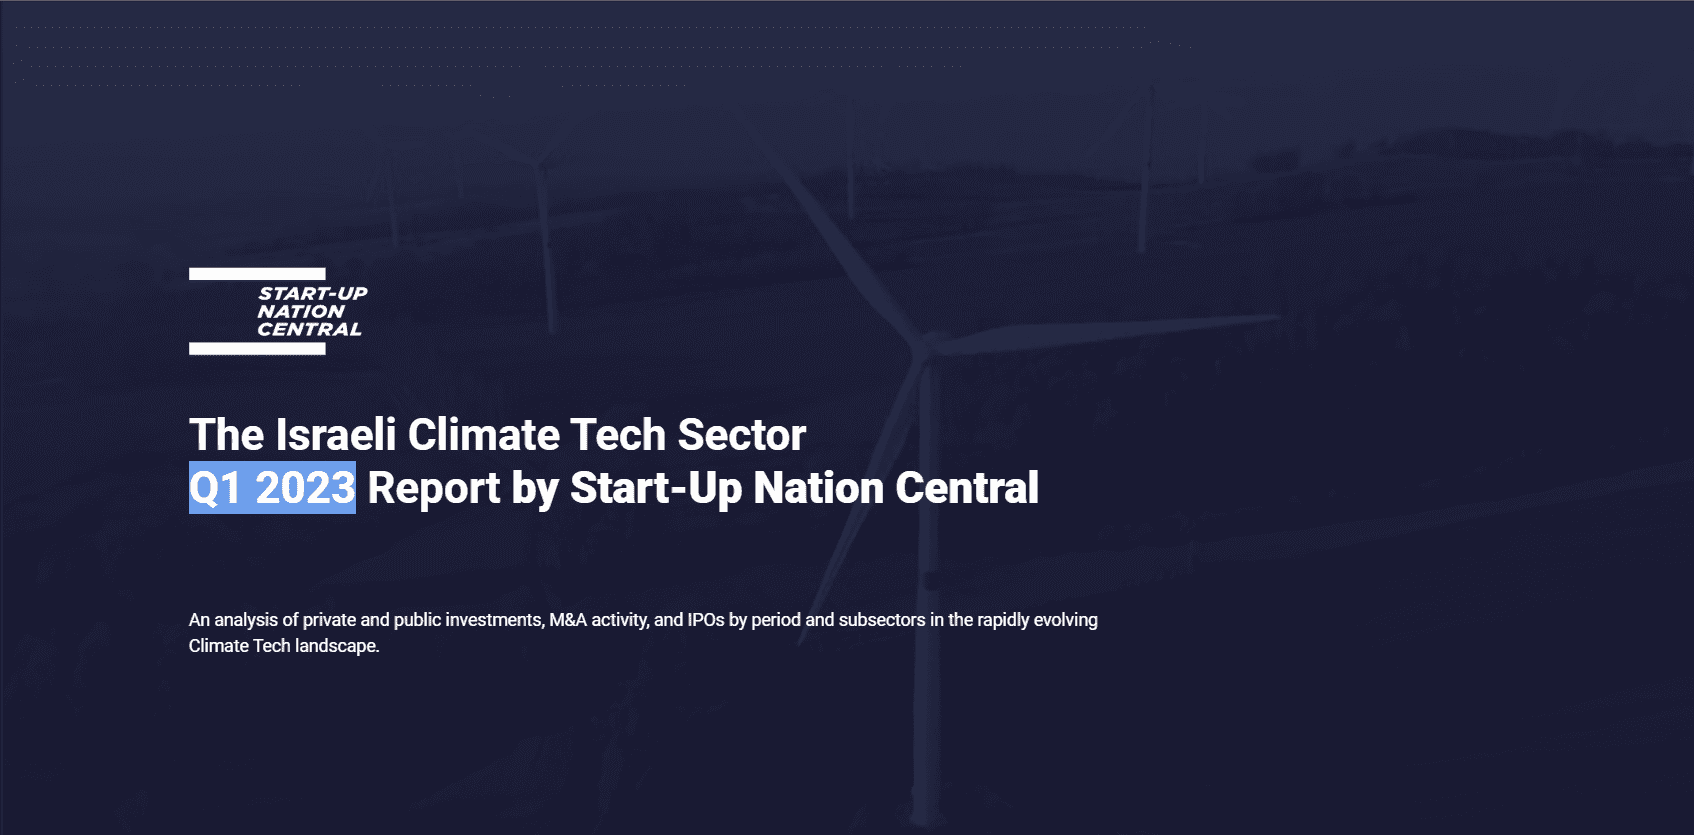 The Israeli Climate Tech Sector Q1 2023 Report​ by Start-Up Nation Central​